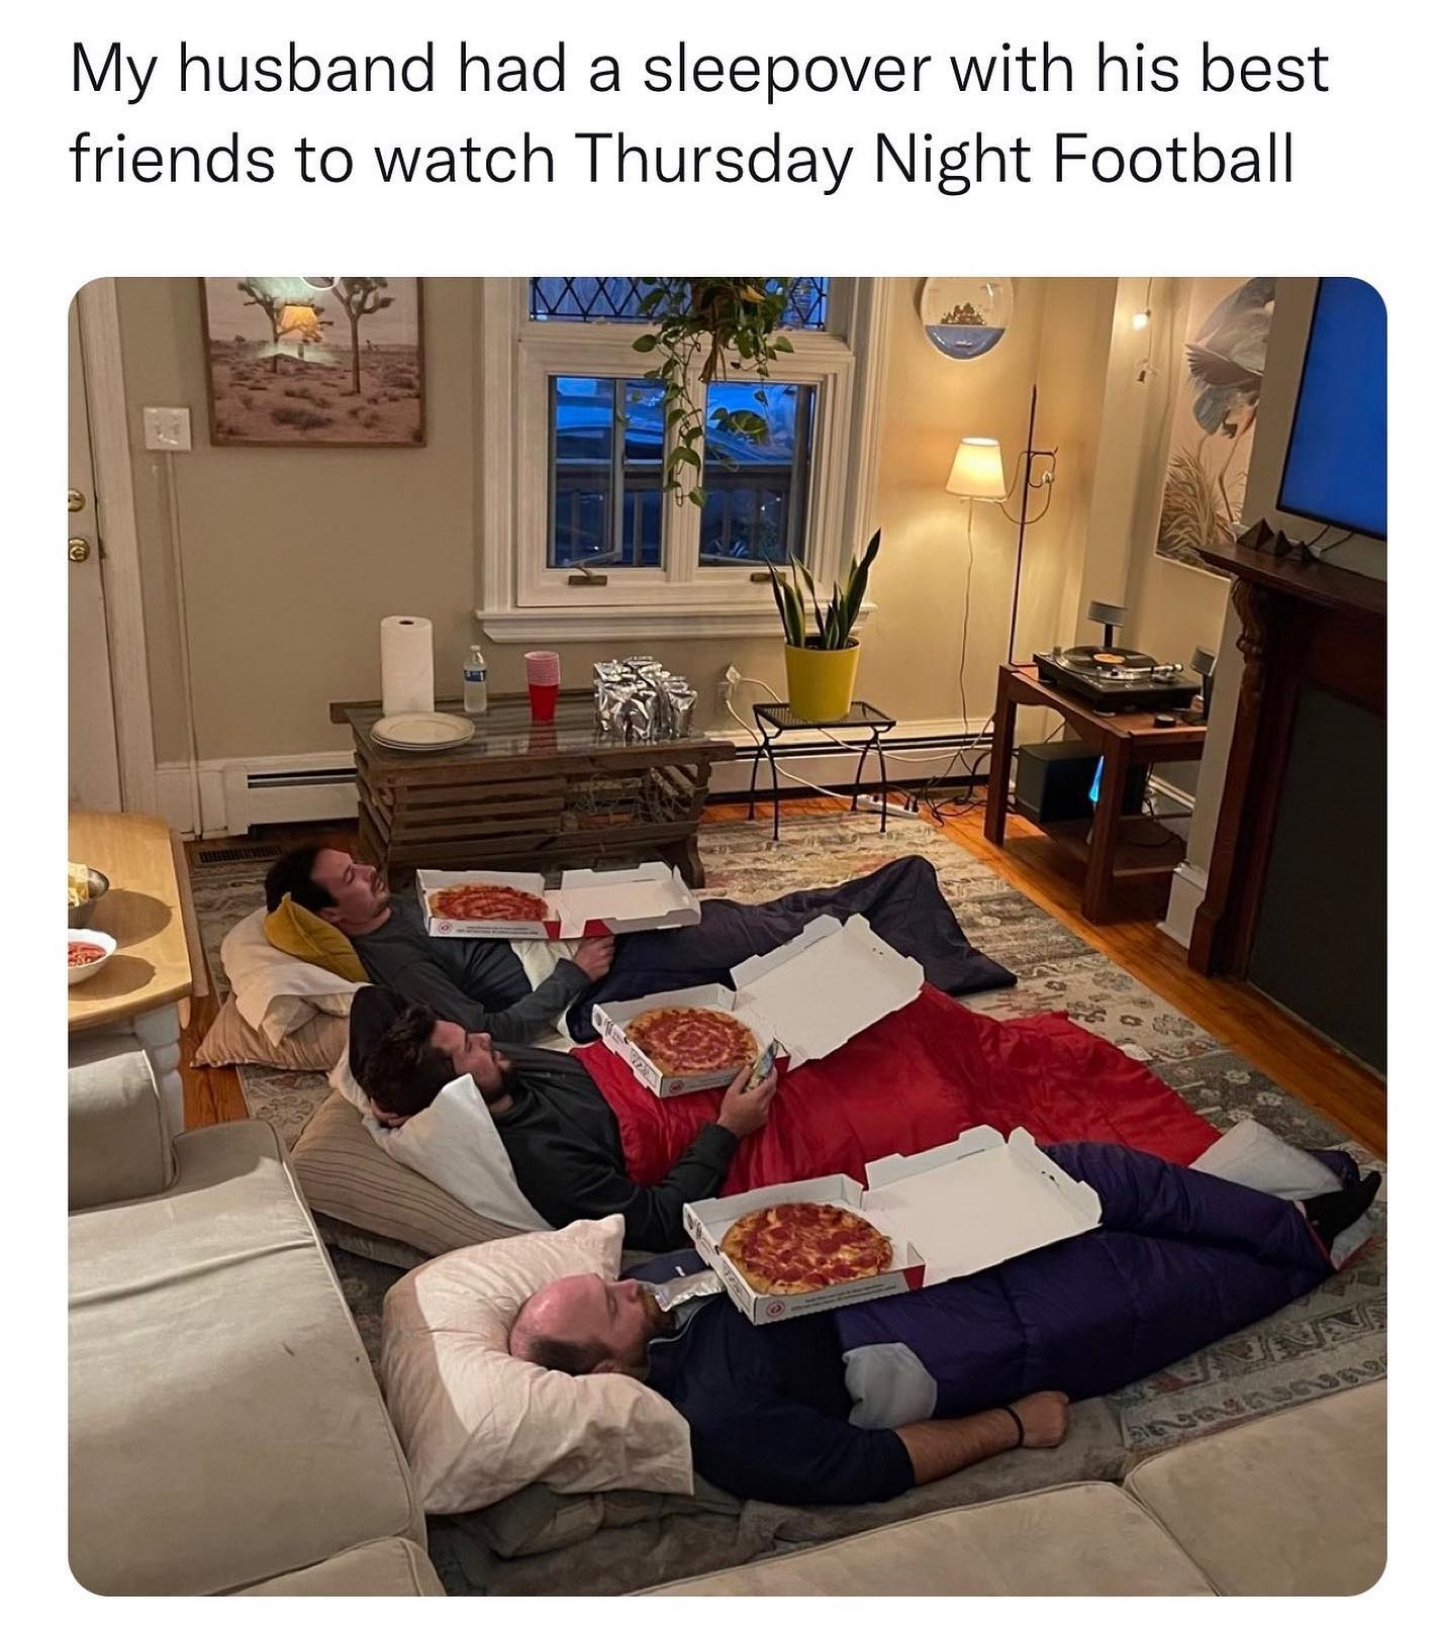 my husband had a sleepover with his friends - My husband had a sleepover with his best friends to watch Thursday Night Football